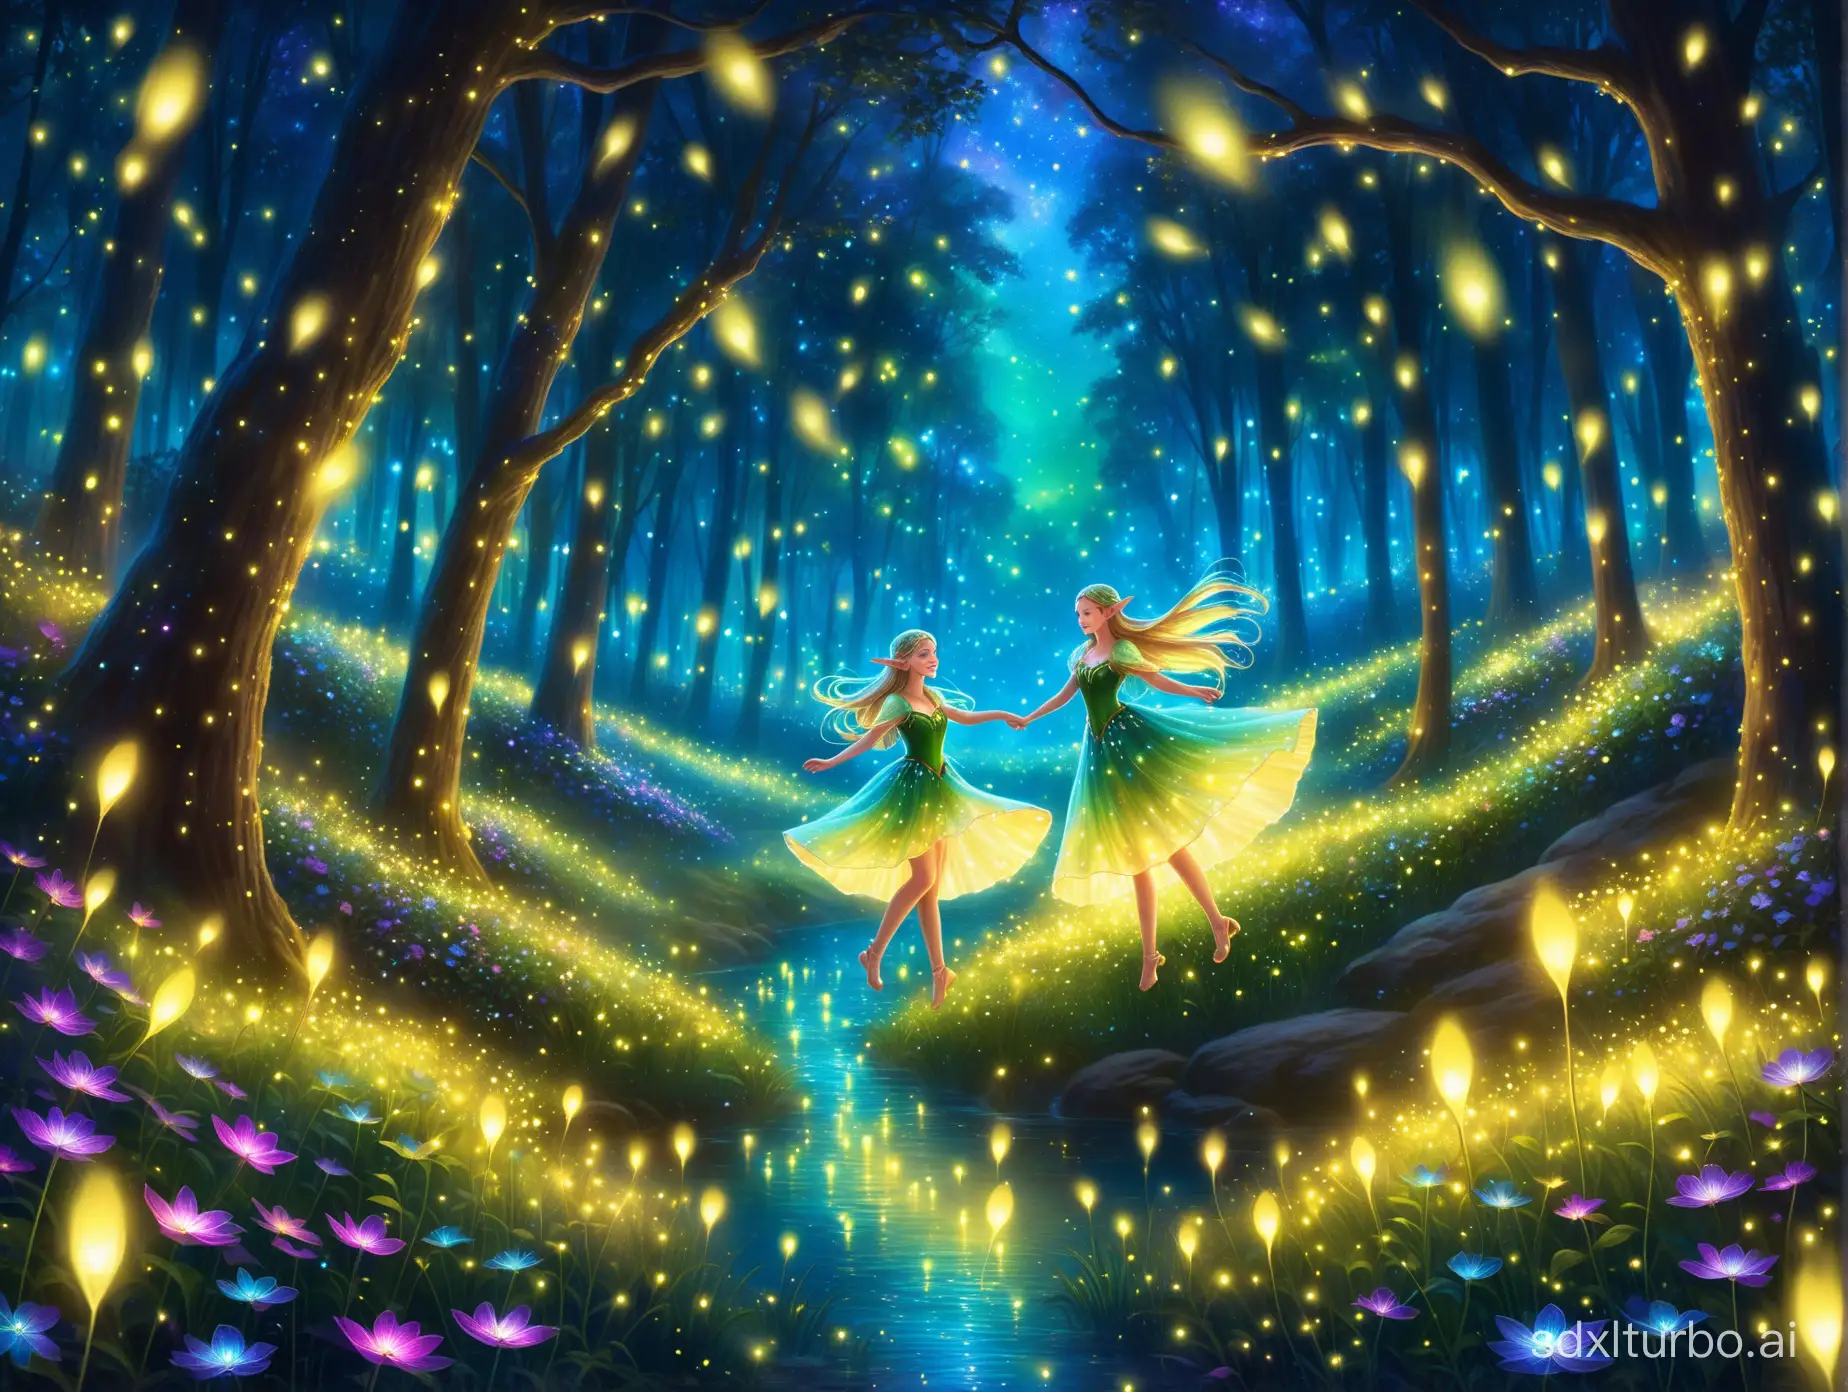 Enchanting-Elves-Dancing-in-Dreamy-Forest-Amidst-Swirling-Fireflies